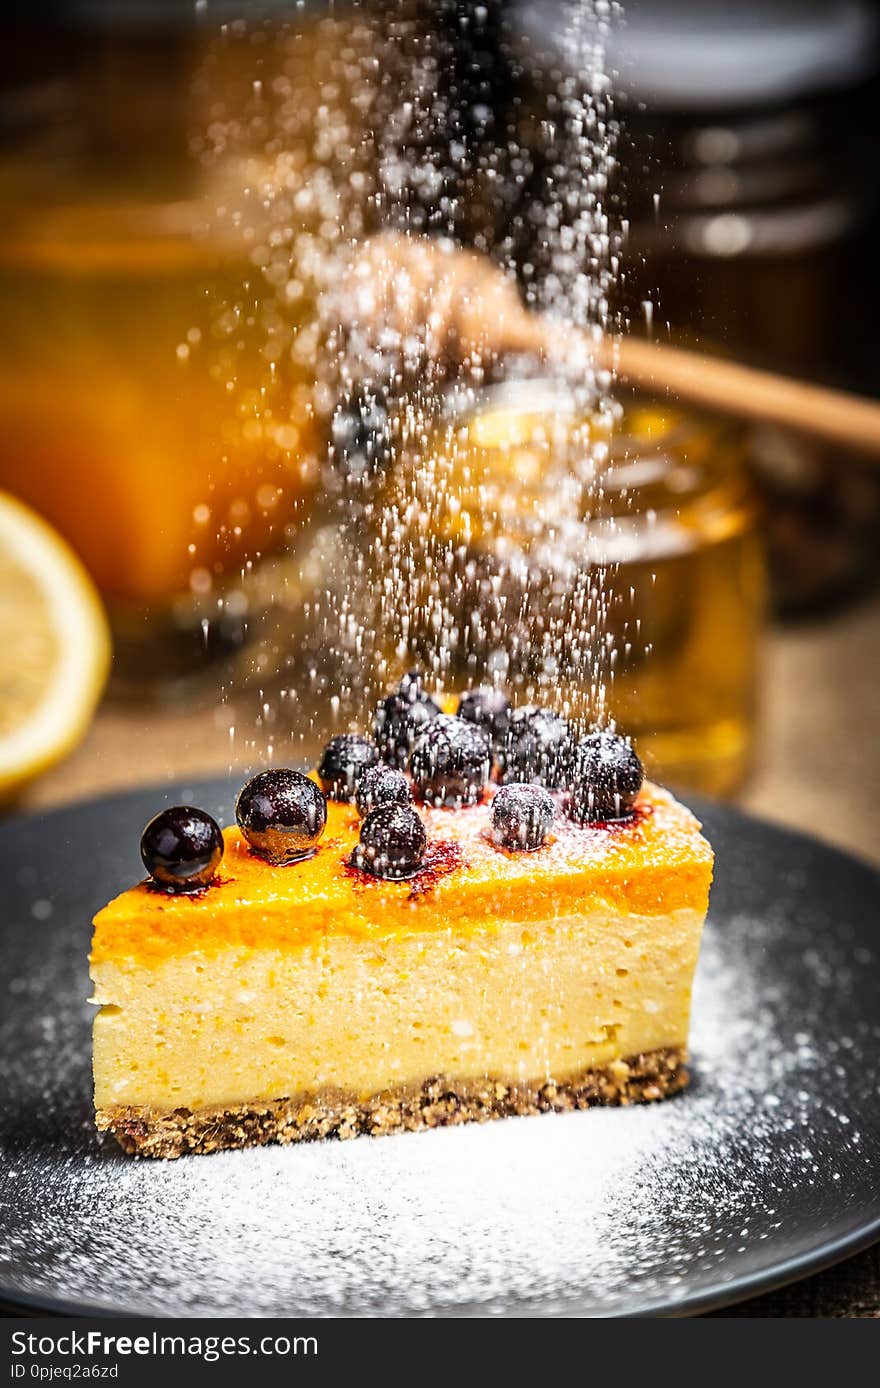 Slice of cheesecake with berries on a blue plate with honey and lemon slices. Blurred background, rural style. Sugar powder. Slice of cheesecake with berries on a blue plate with honey and lemon slices. Blurred background, rural style. Sugar powder